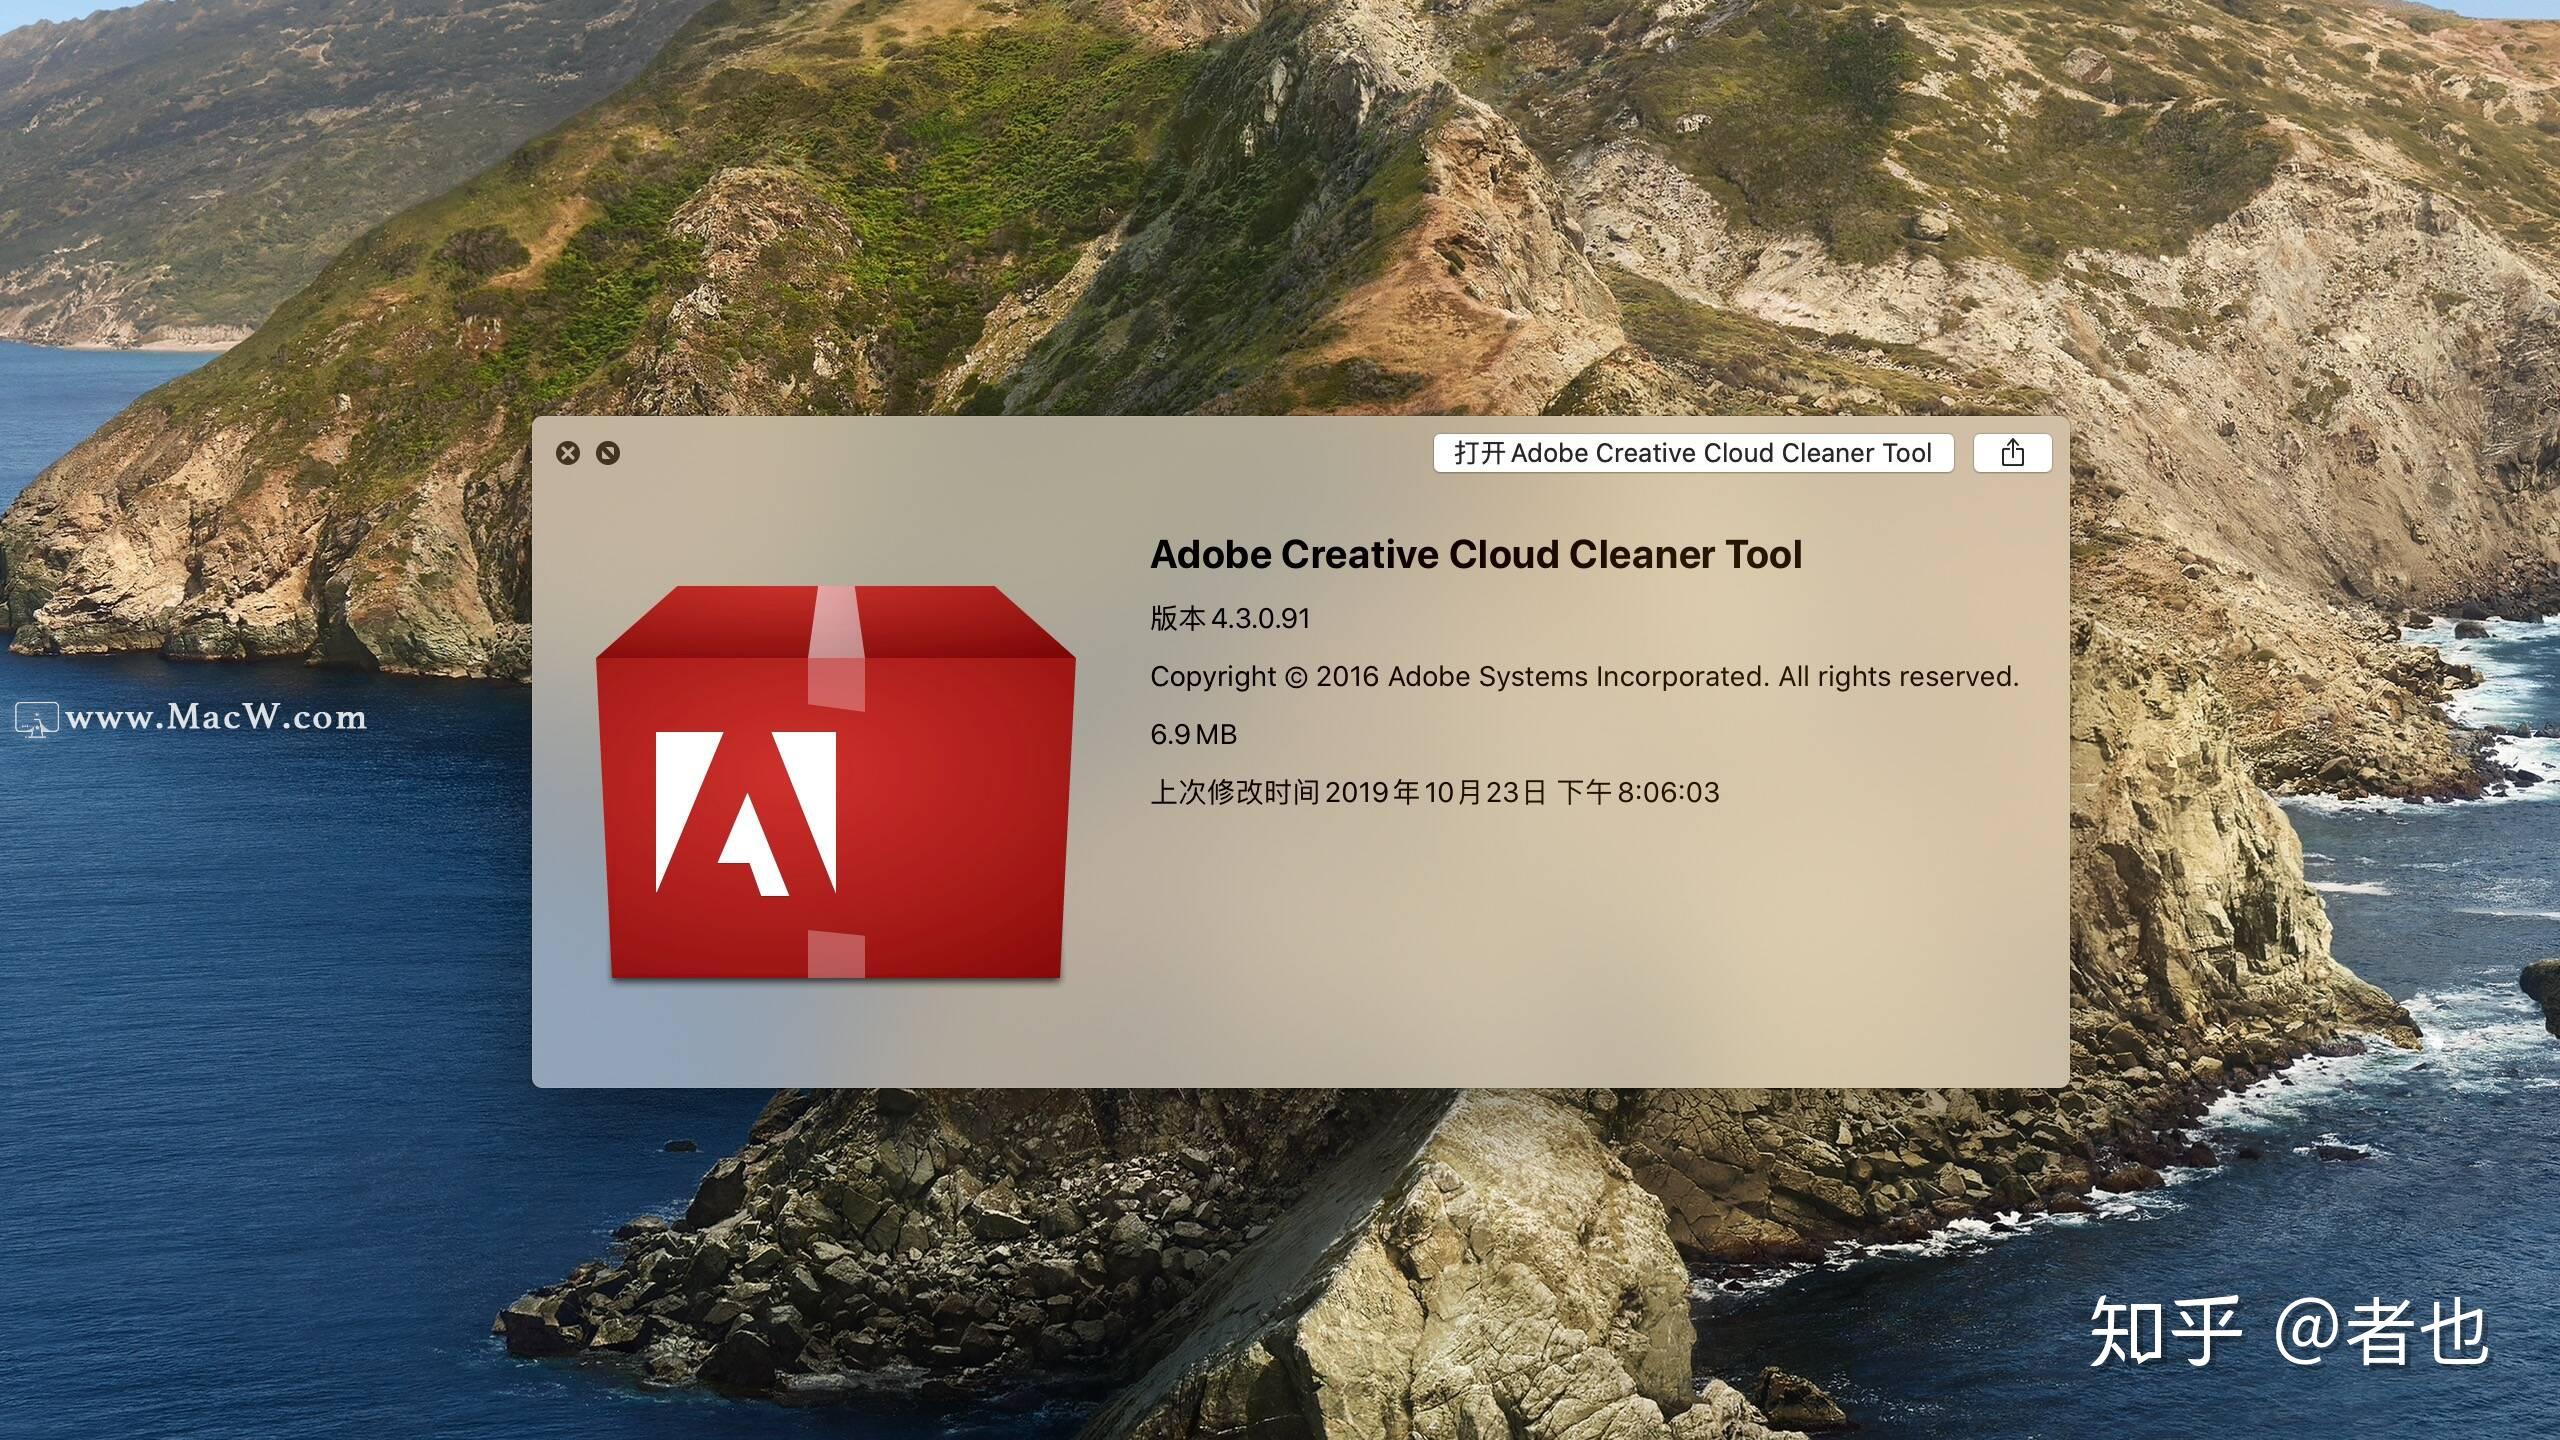 Adobe Creative Cloud Cleaner Tool 4.3.0.395 for windows instal